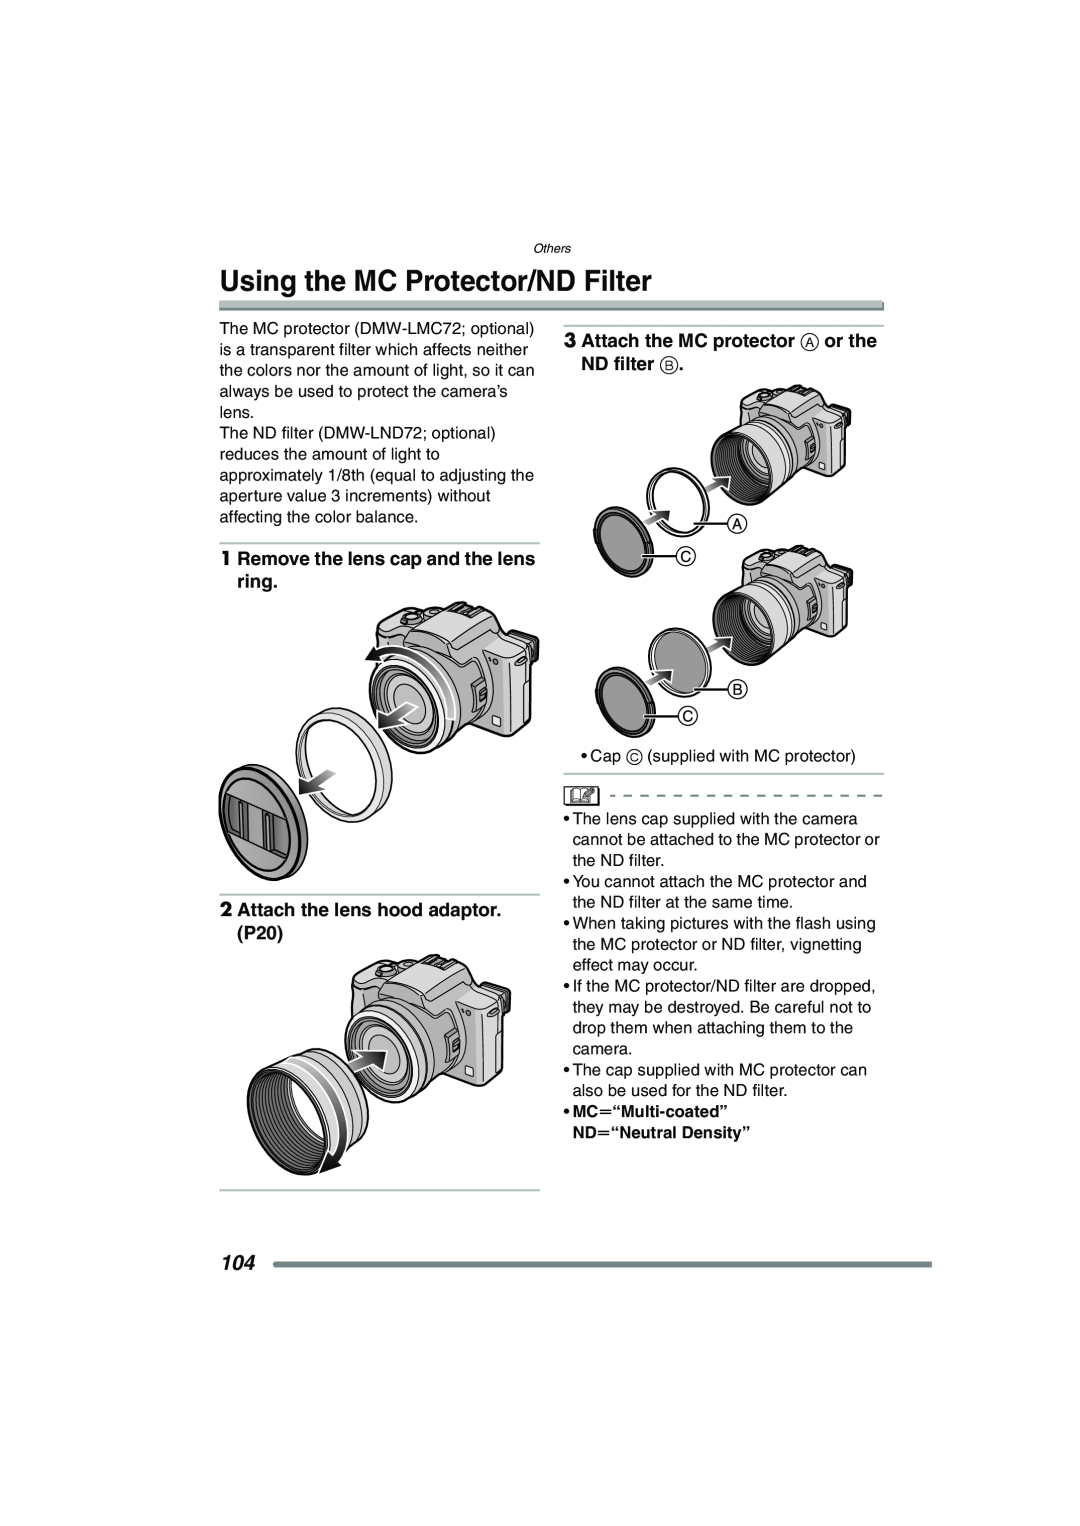 Panasonic DMC-FZ20PP operating instructions Using the MC Protector/ND Filter, Attach the MC protector A or the ND filter B 